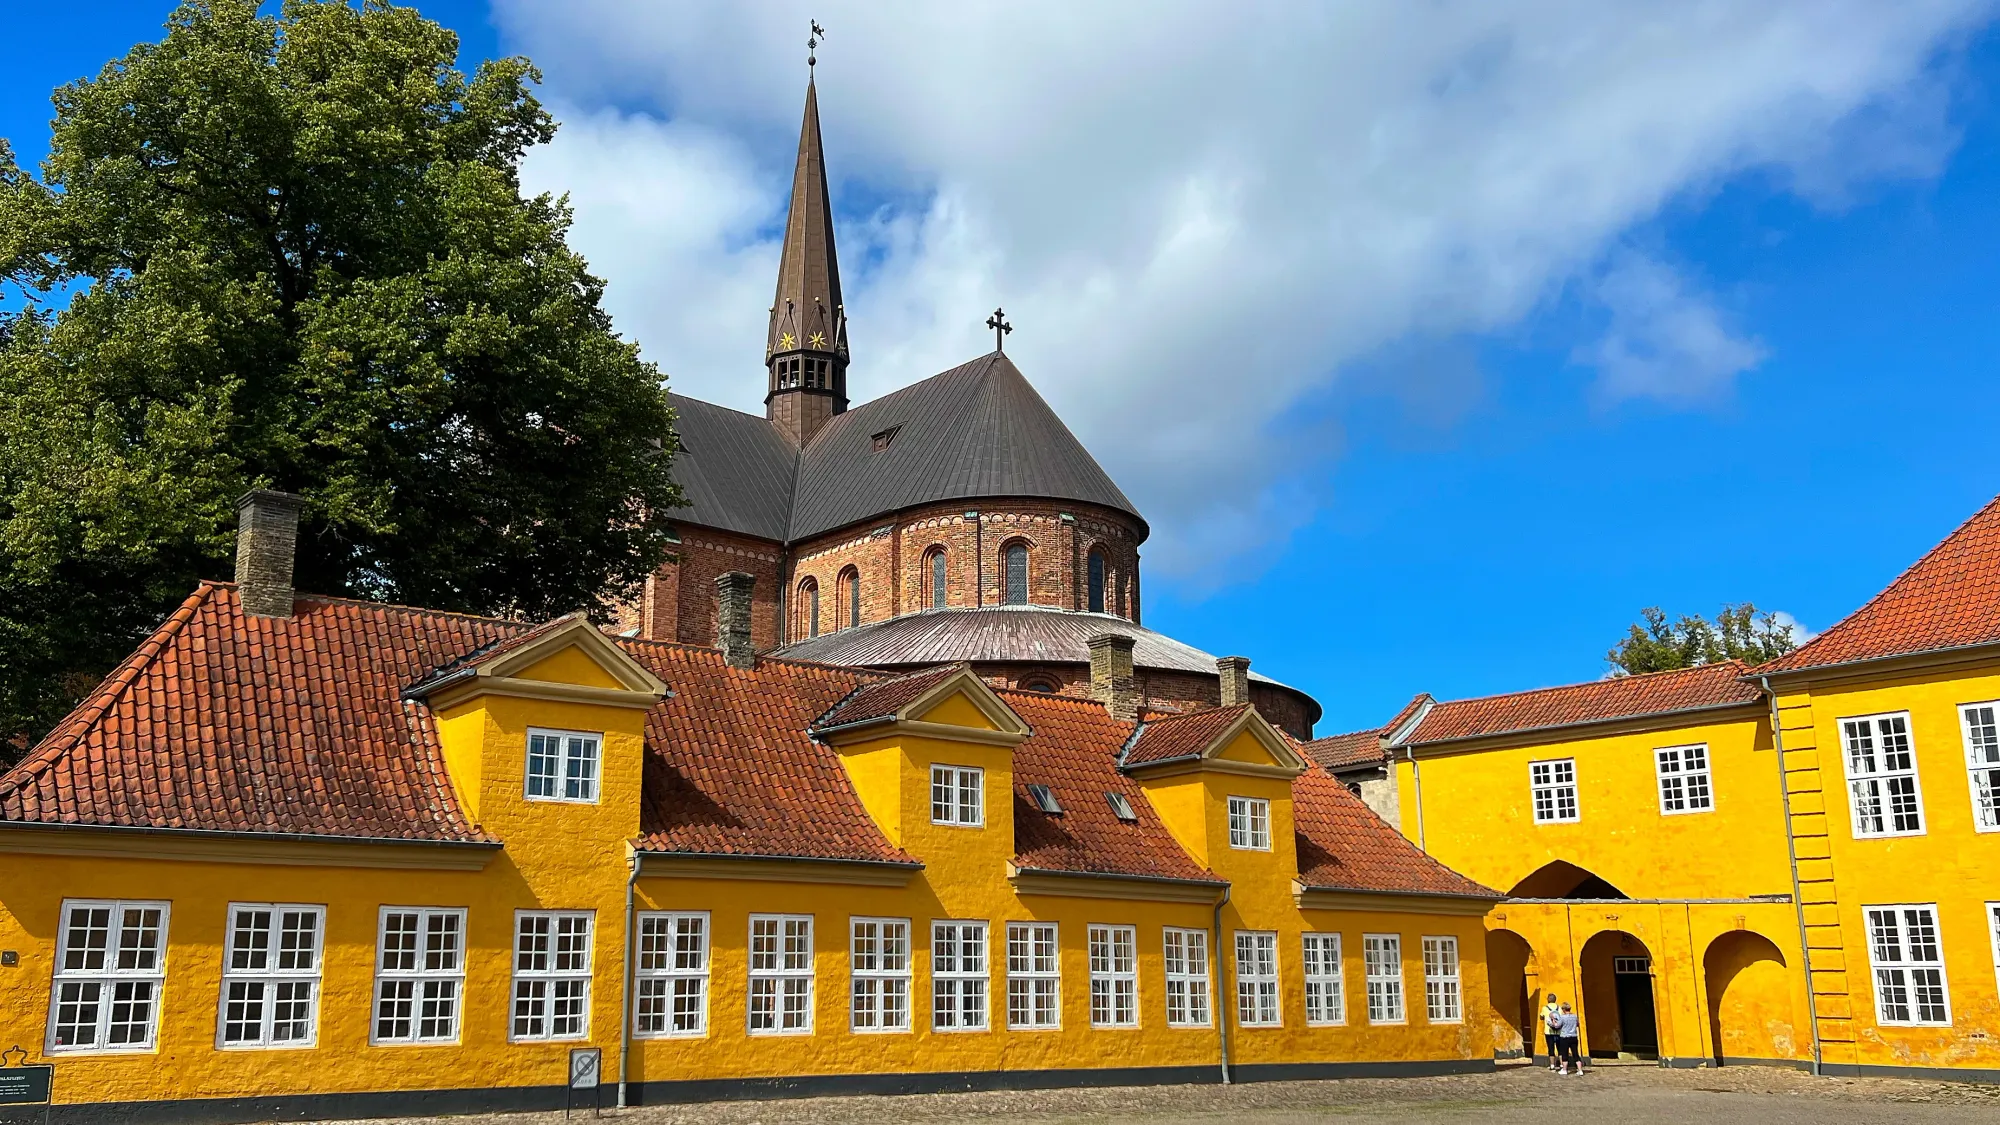 Yellow Mansion with a church steeple in the background